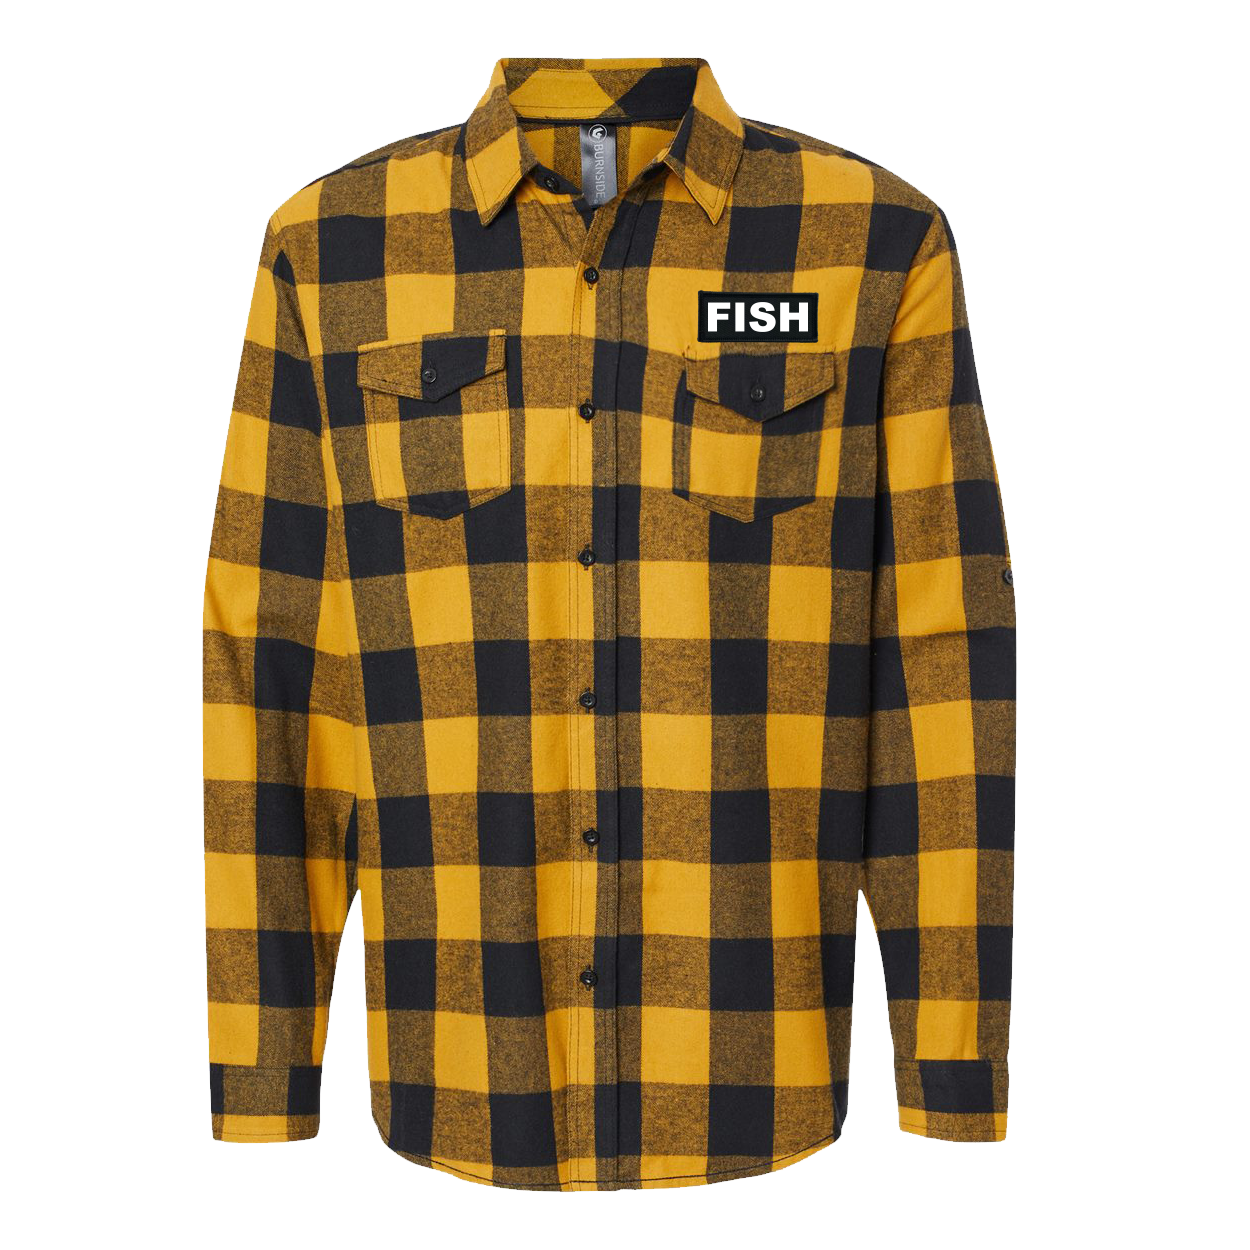 Fish Brand Logo Classic Unisex Woven Patch Quilted Button Flannel Jacket Black/Gold Buffalo